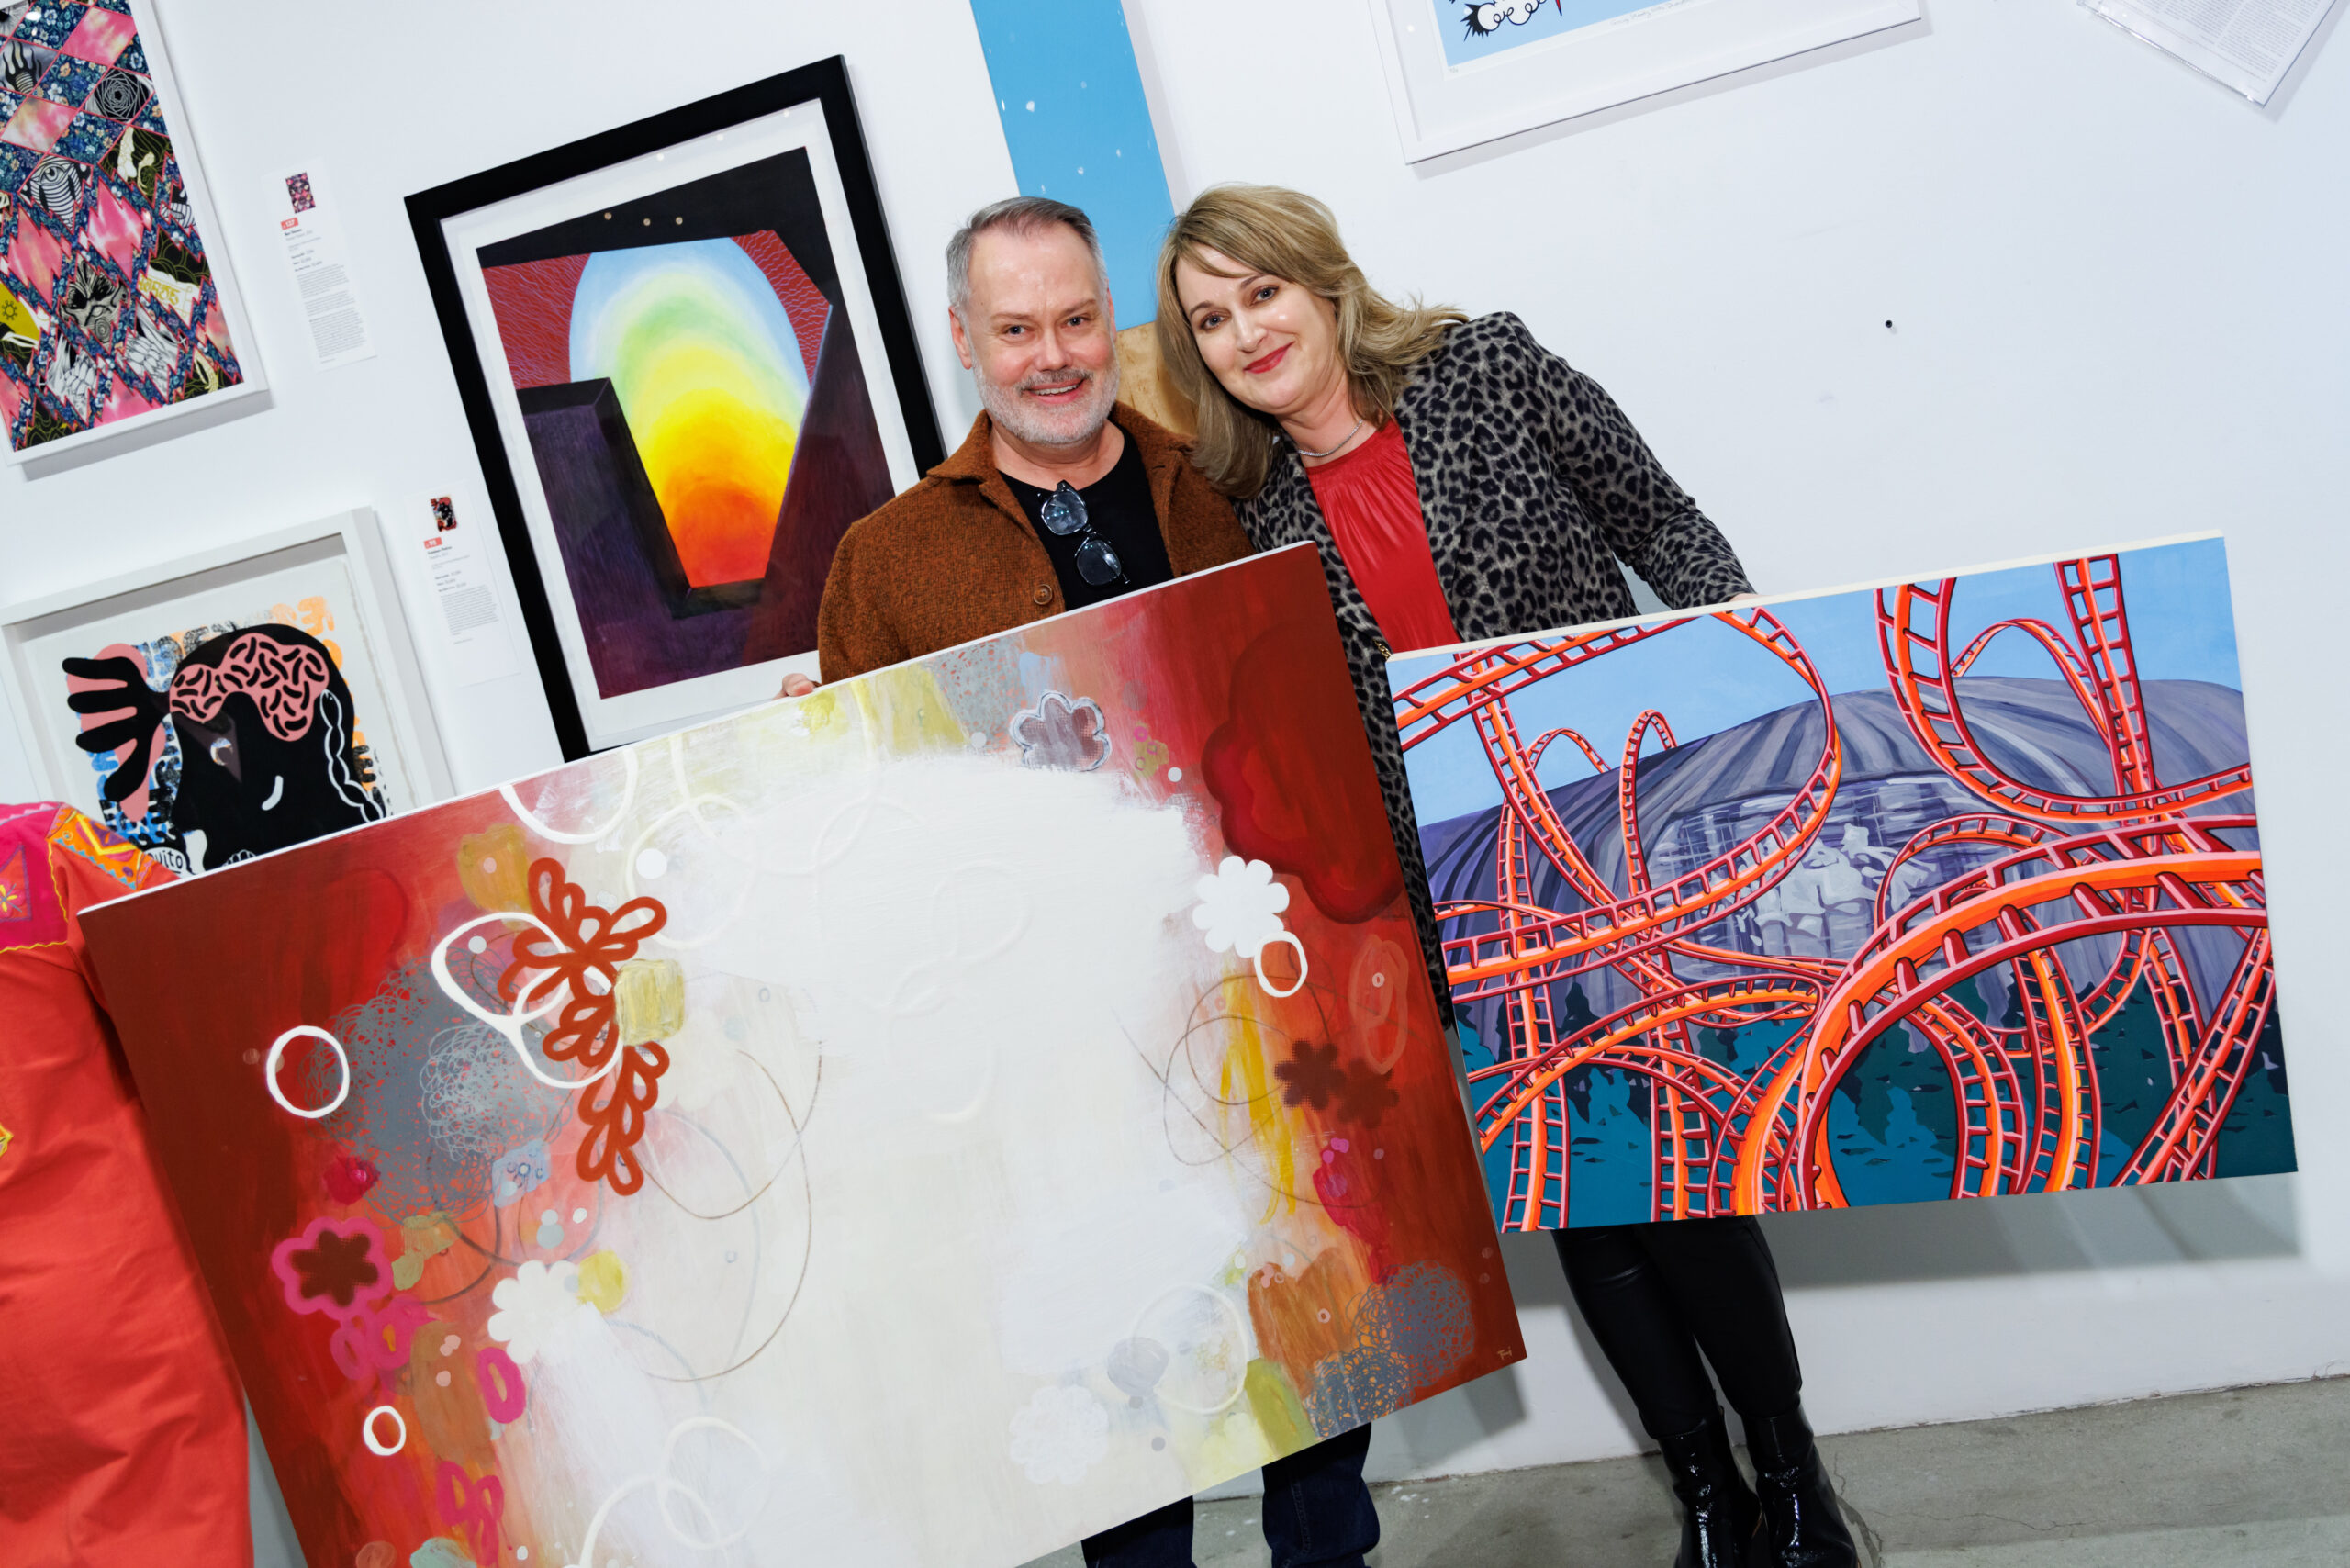 Image of two people posing with two artworks in front of a wall featuring many other artworks. The man is holding a red and white piece with flowers, while the woman is holding a blue and red piece with loops of rollercoaster track.